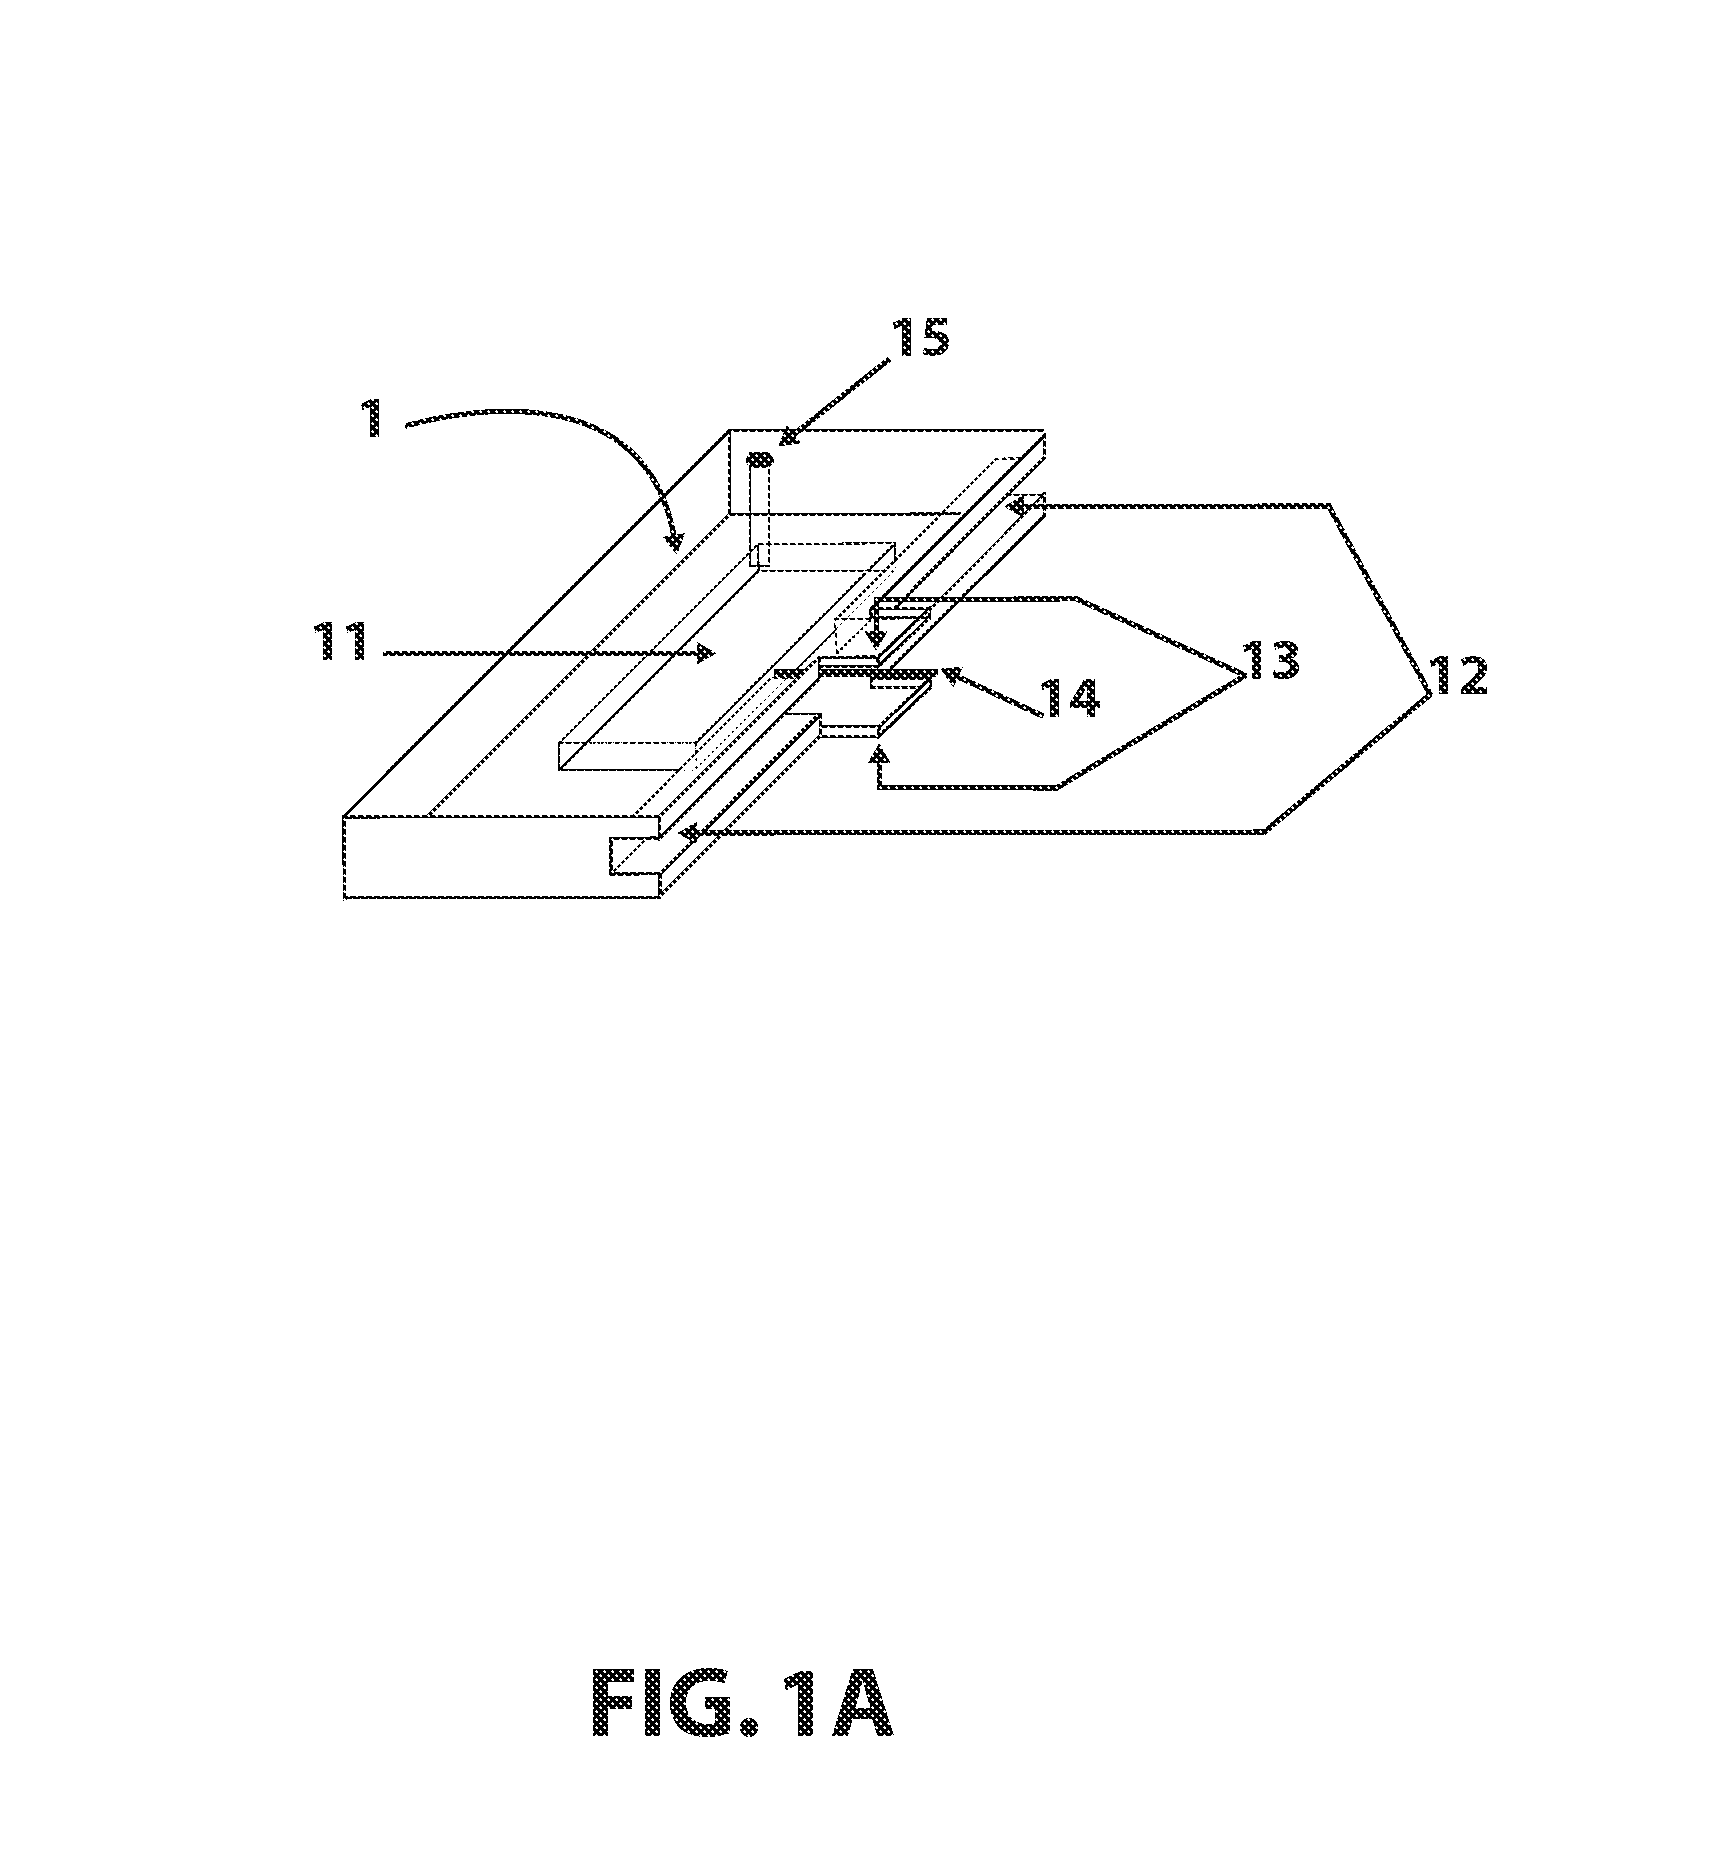 Self-contained modular analytical cartridge and  programmable reagent delivery system